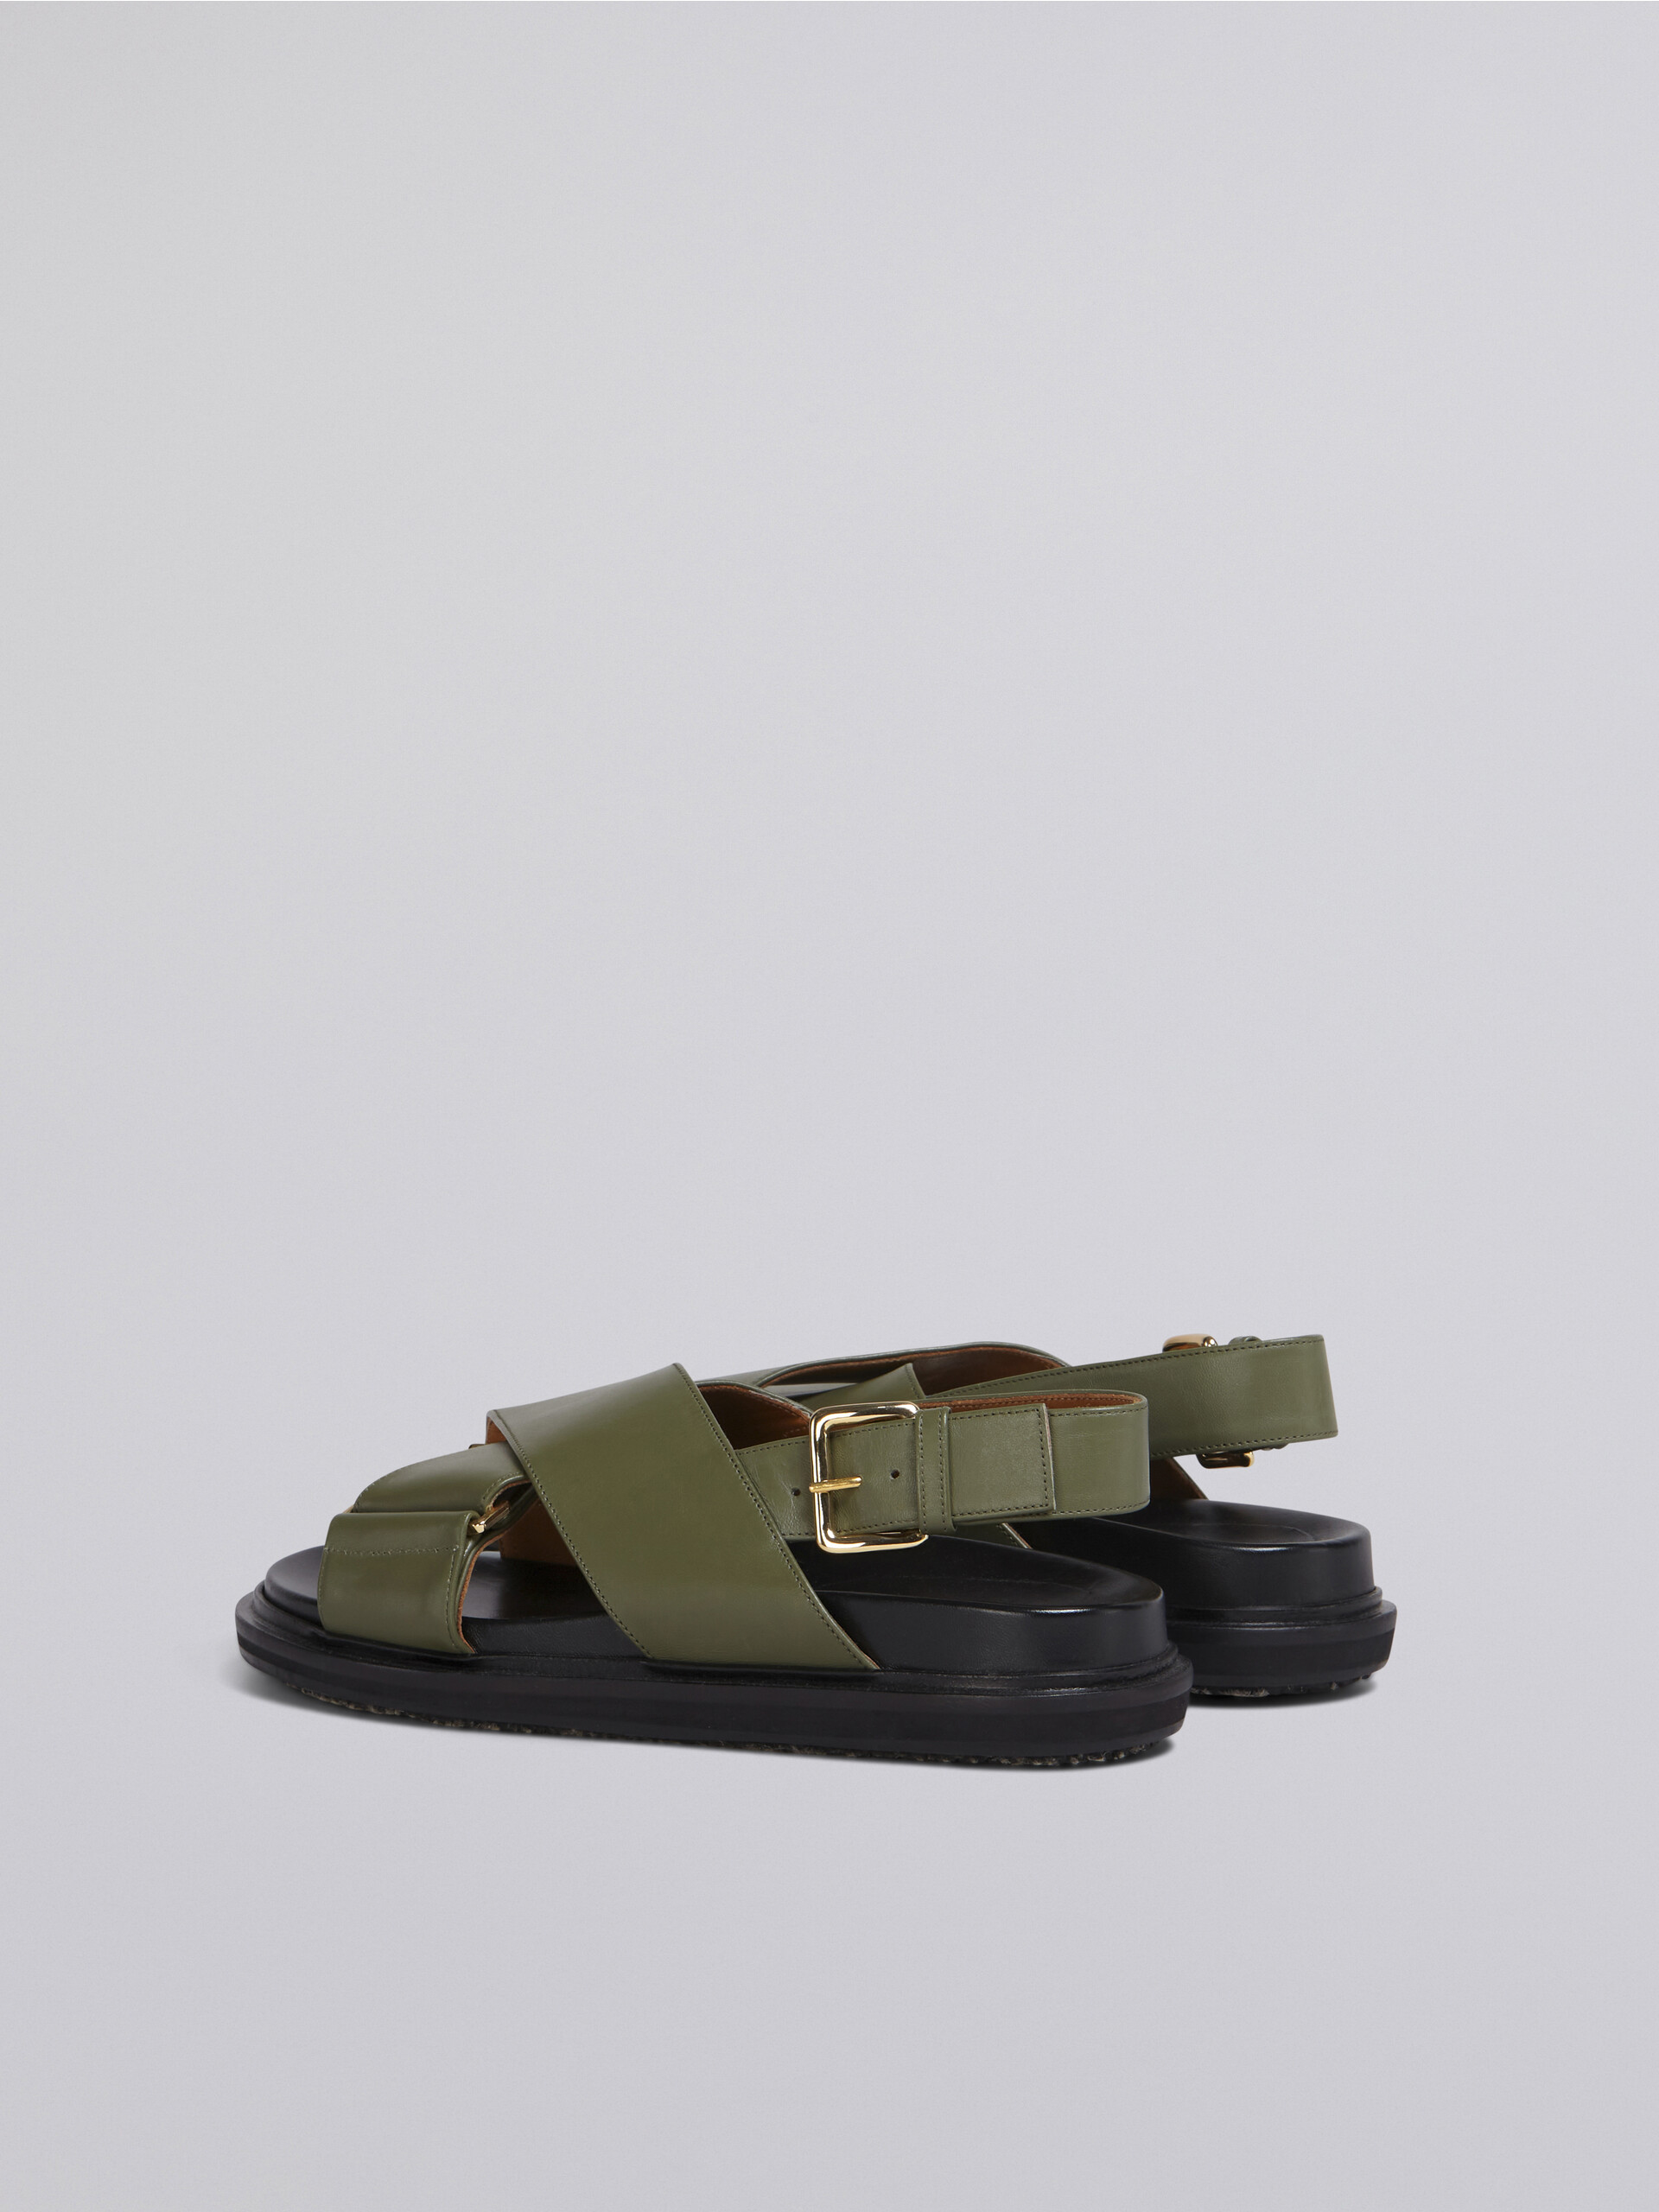 Green smooth calf leather fussbett - Sandals - Image 3